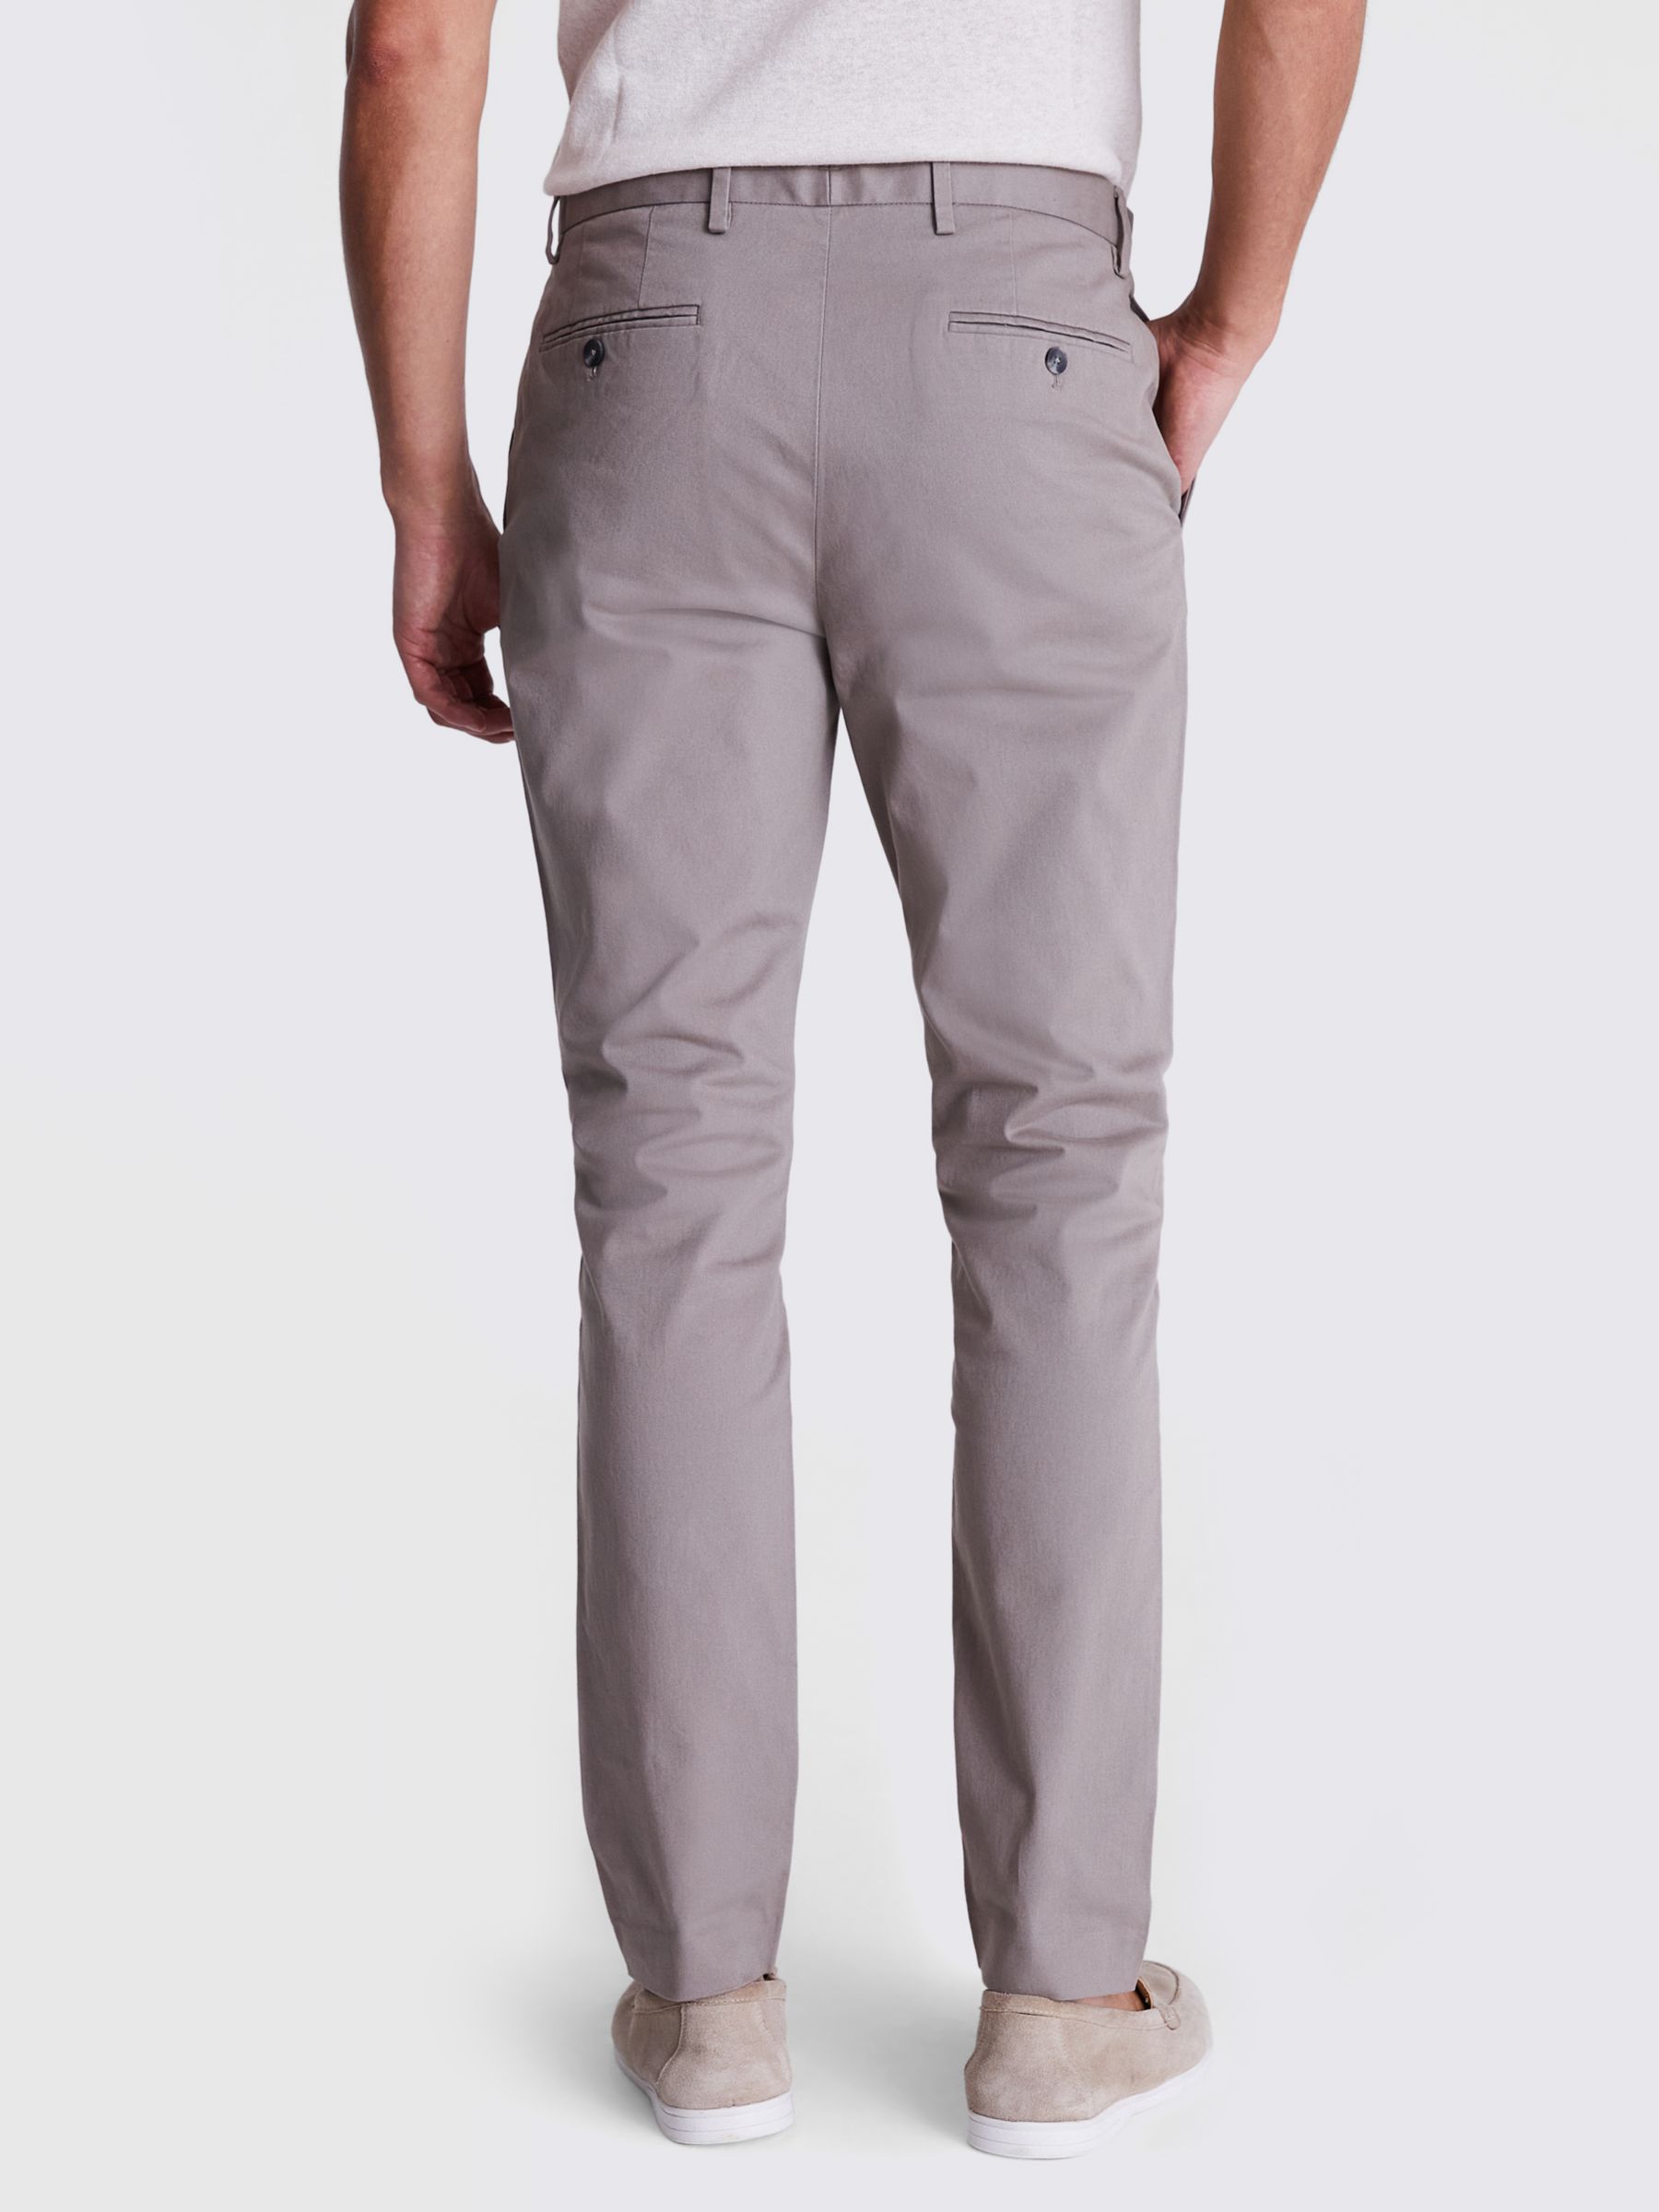 Buy Moss Slim Fit Organic Cotton Stretch Chinos Online at johnlewis.com